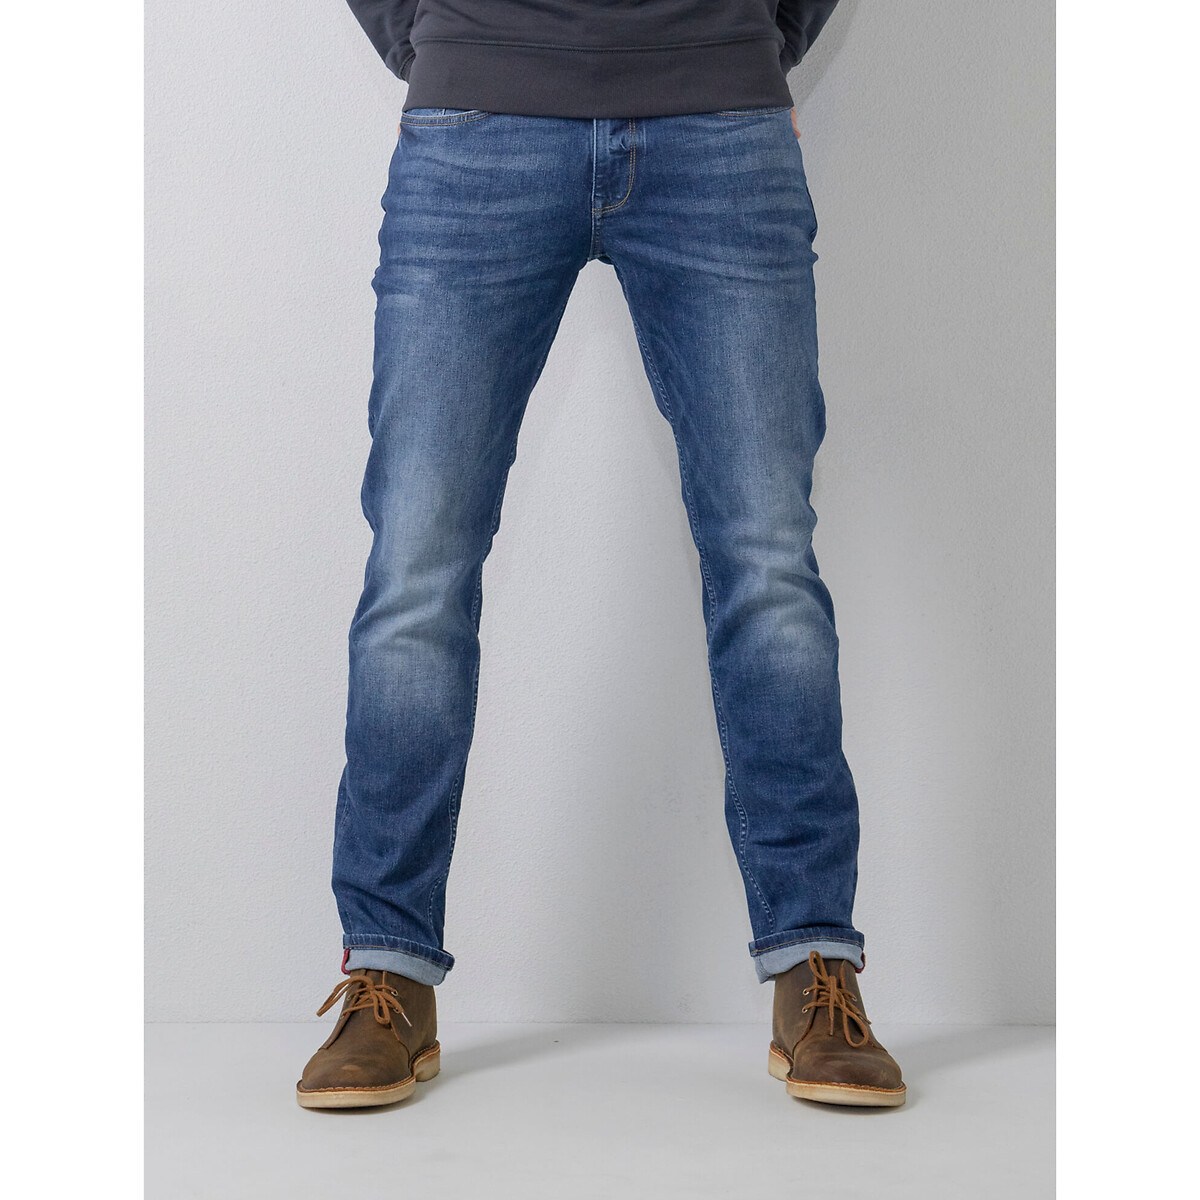 Russel Straight Stretch Jeans, Mid Rise